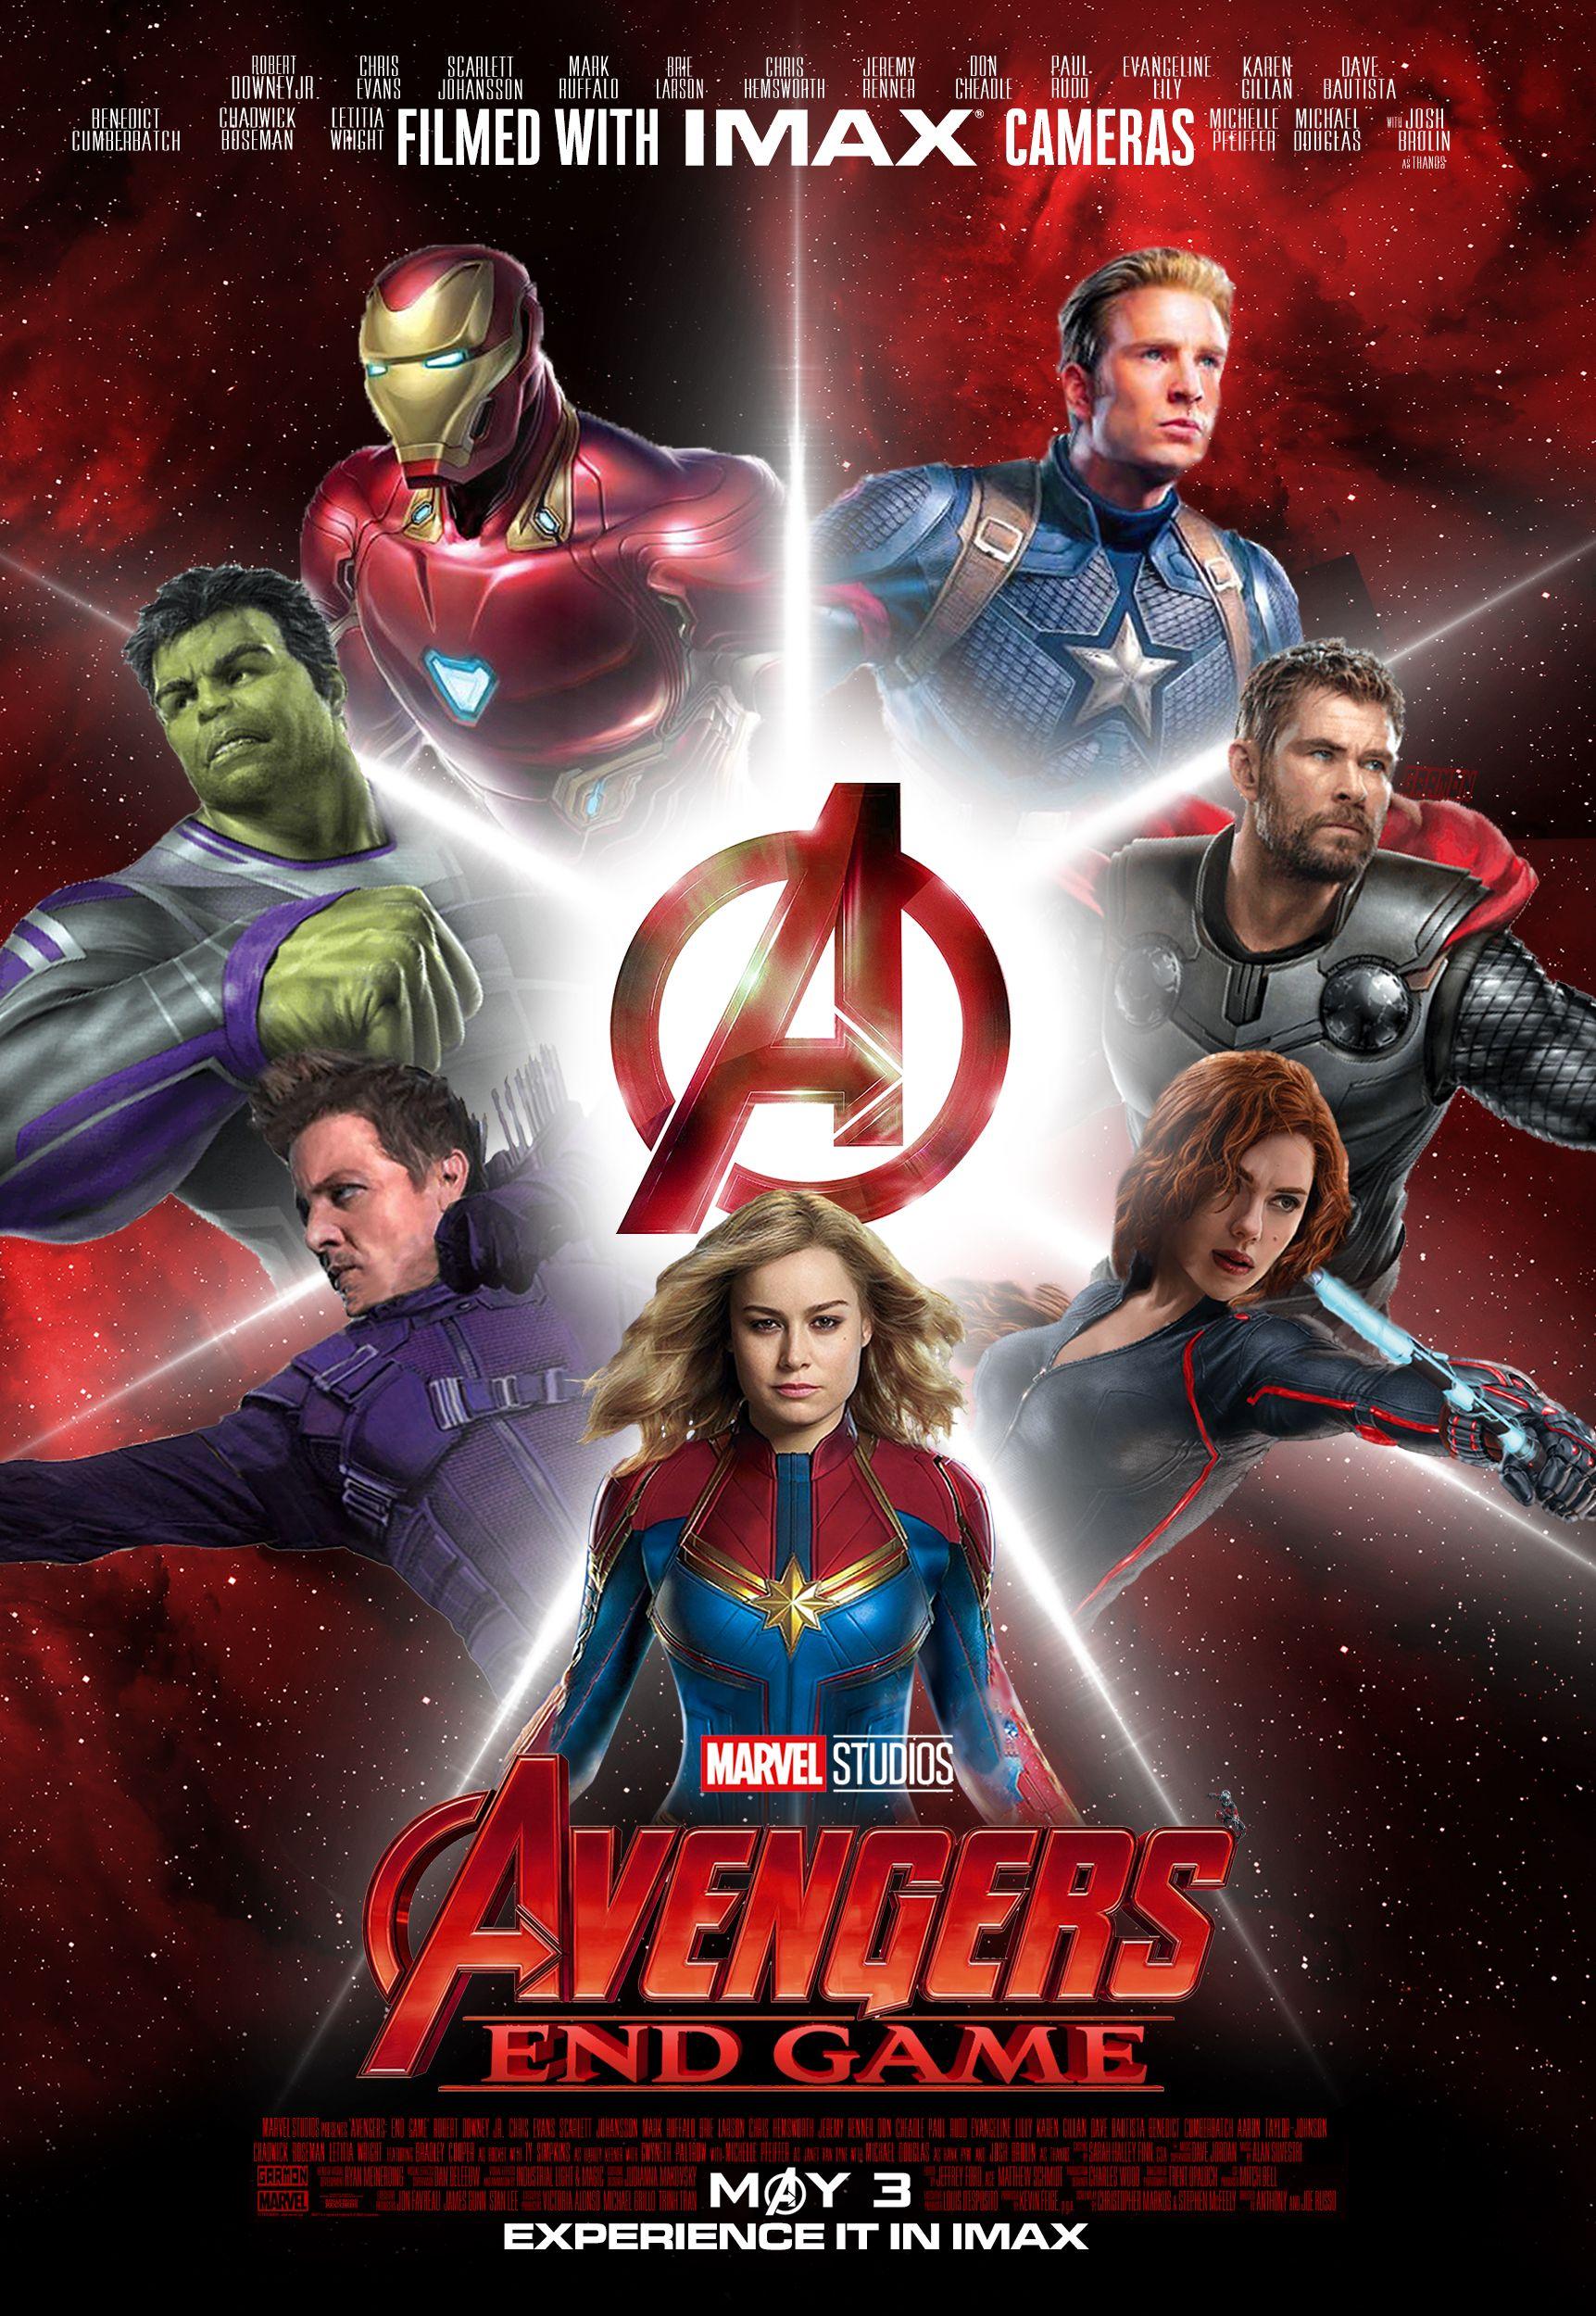 Decided to put together a little poster for the upcoming Avengers